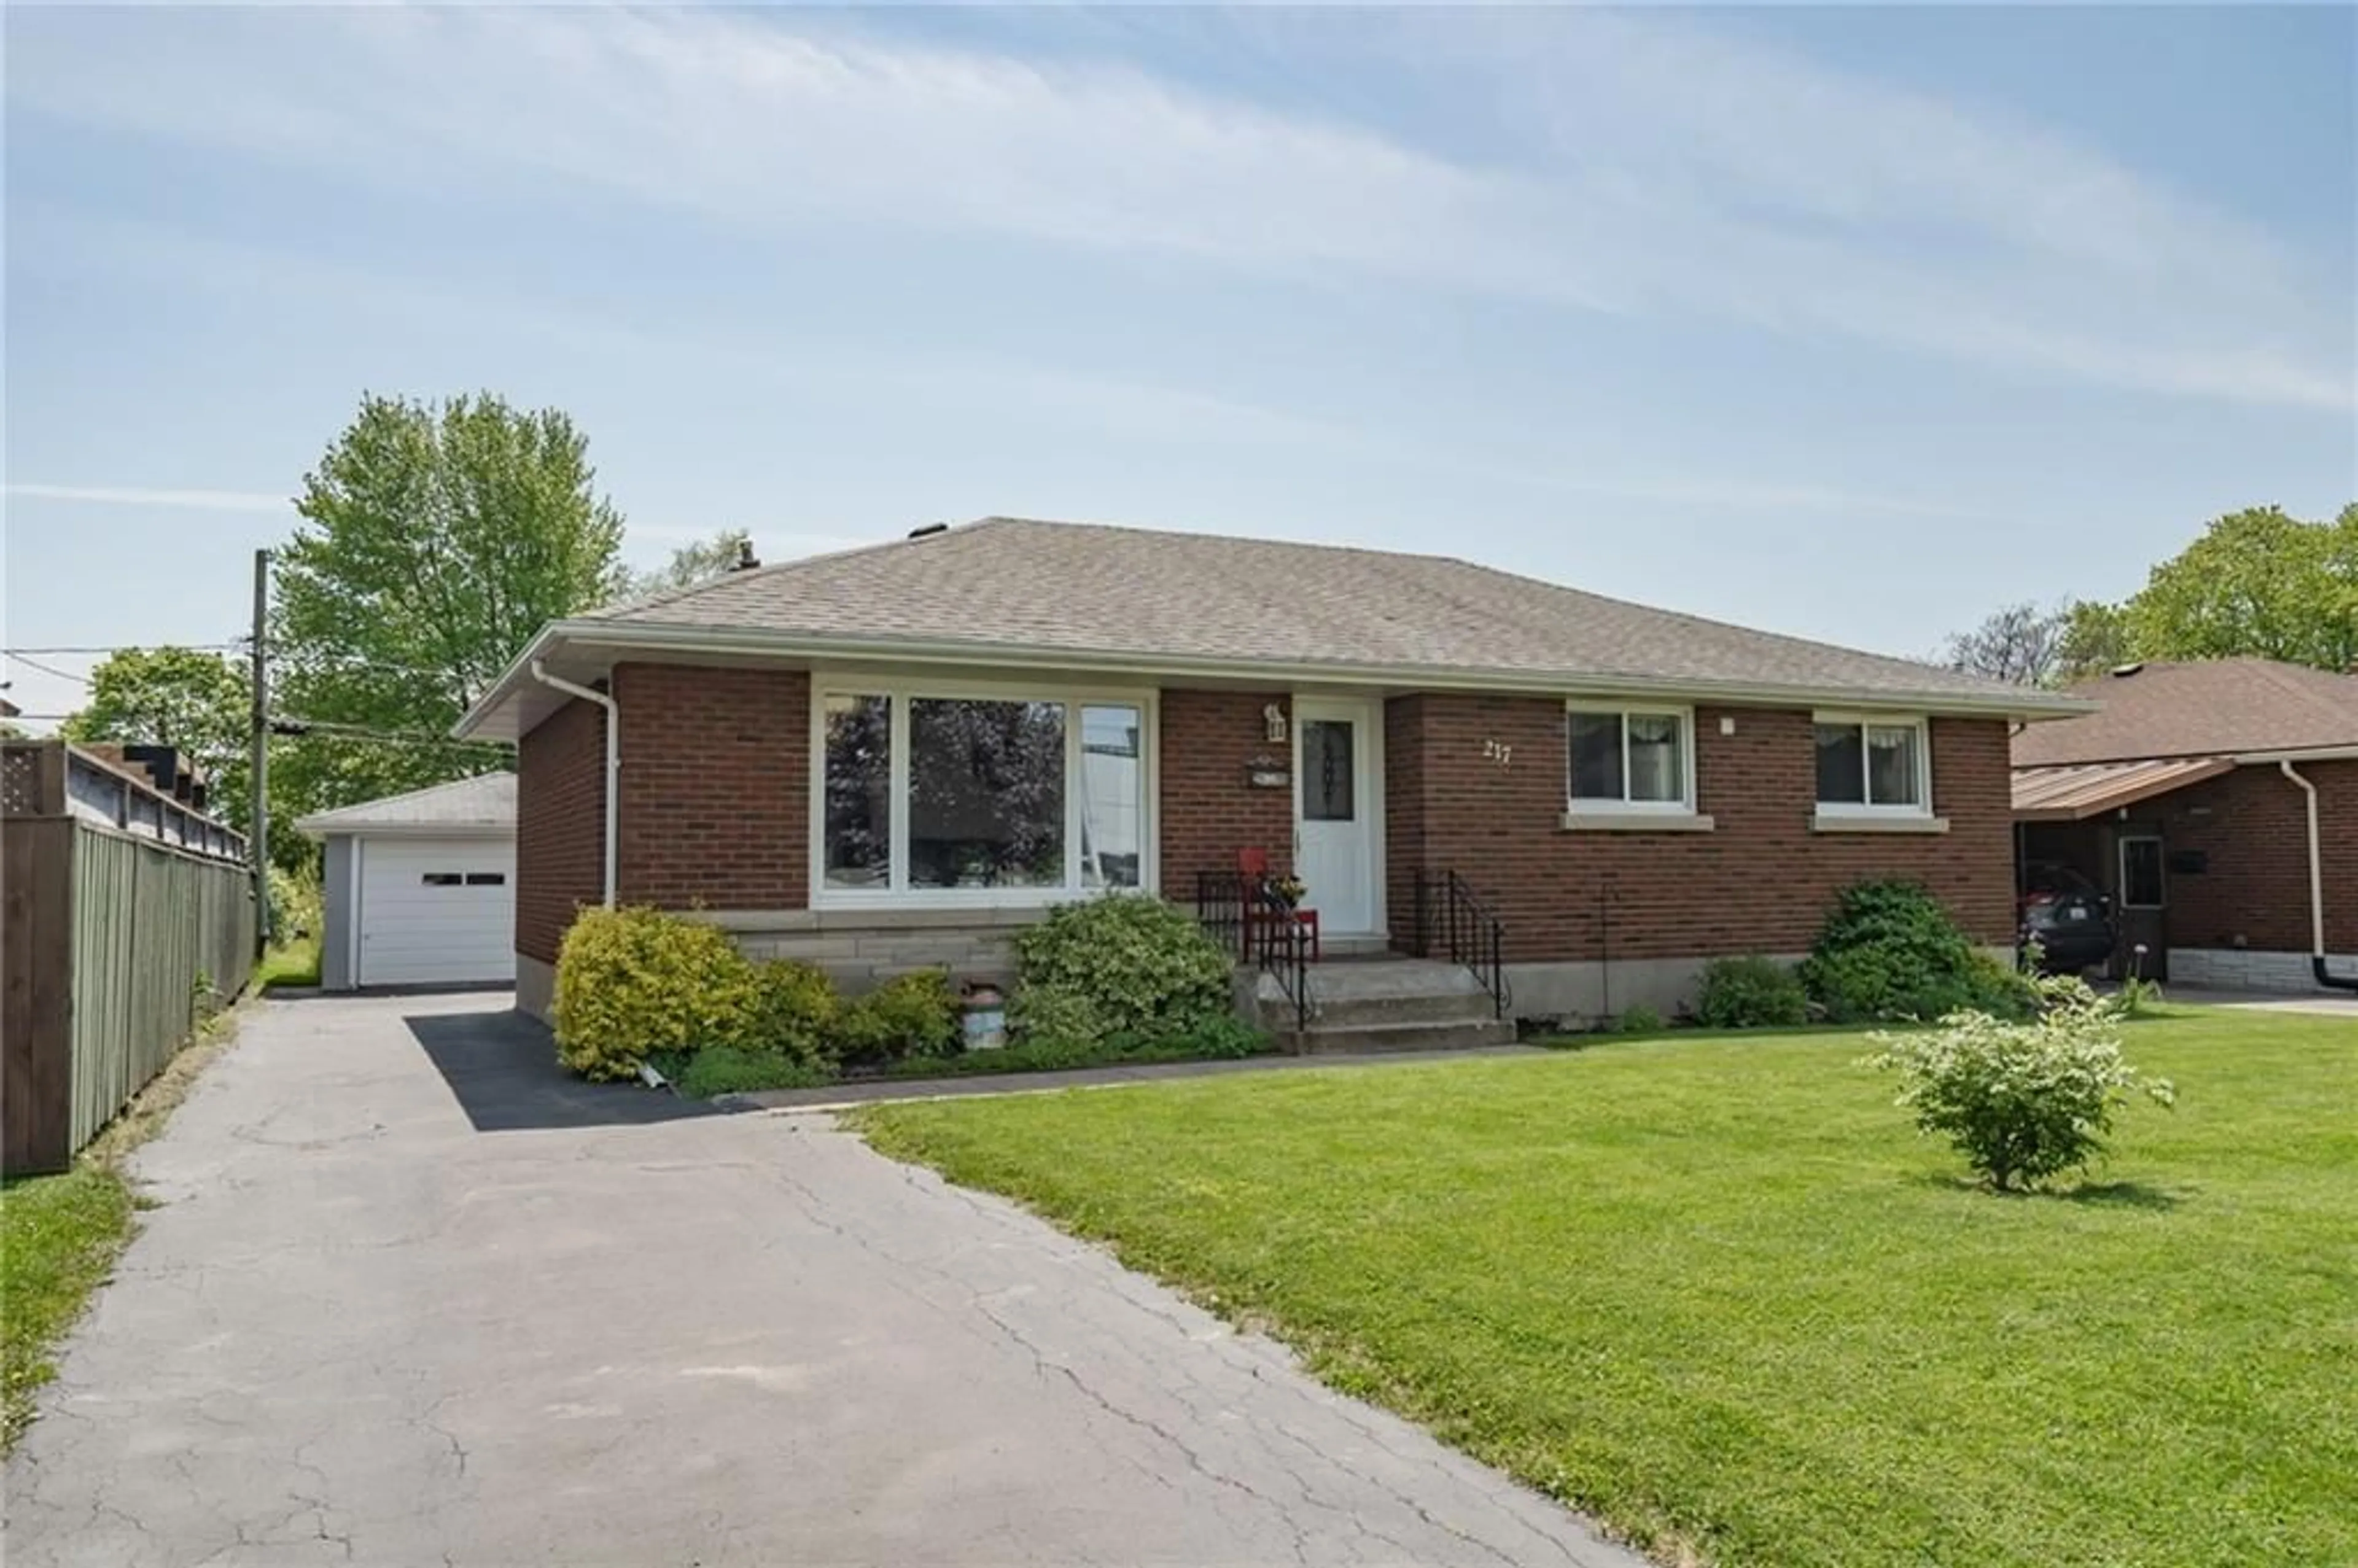 Home with brick exterior material for 217 Fitch St, Welland Ontario L3C 4W3